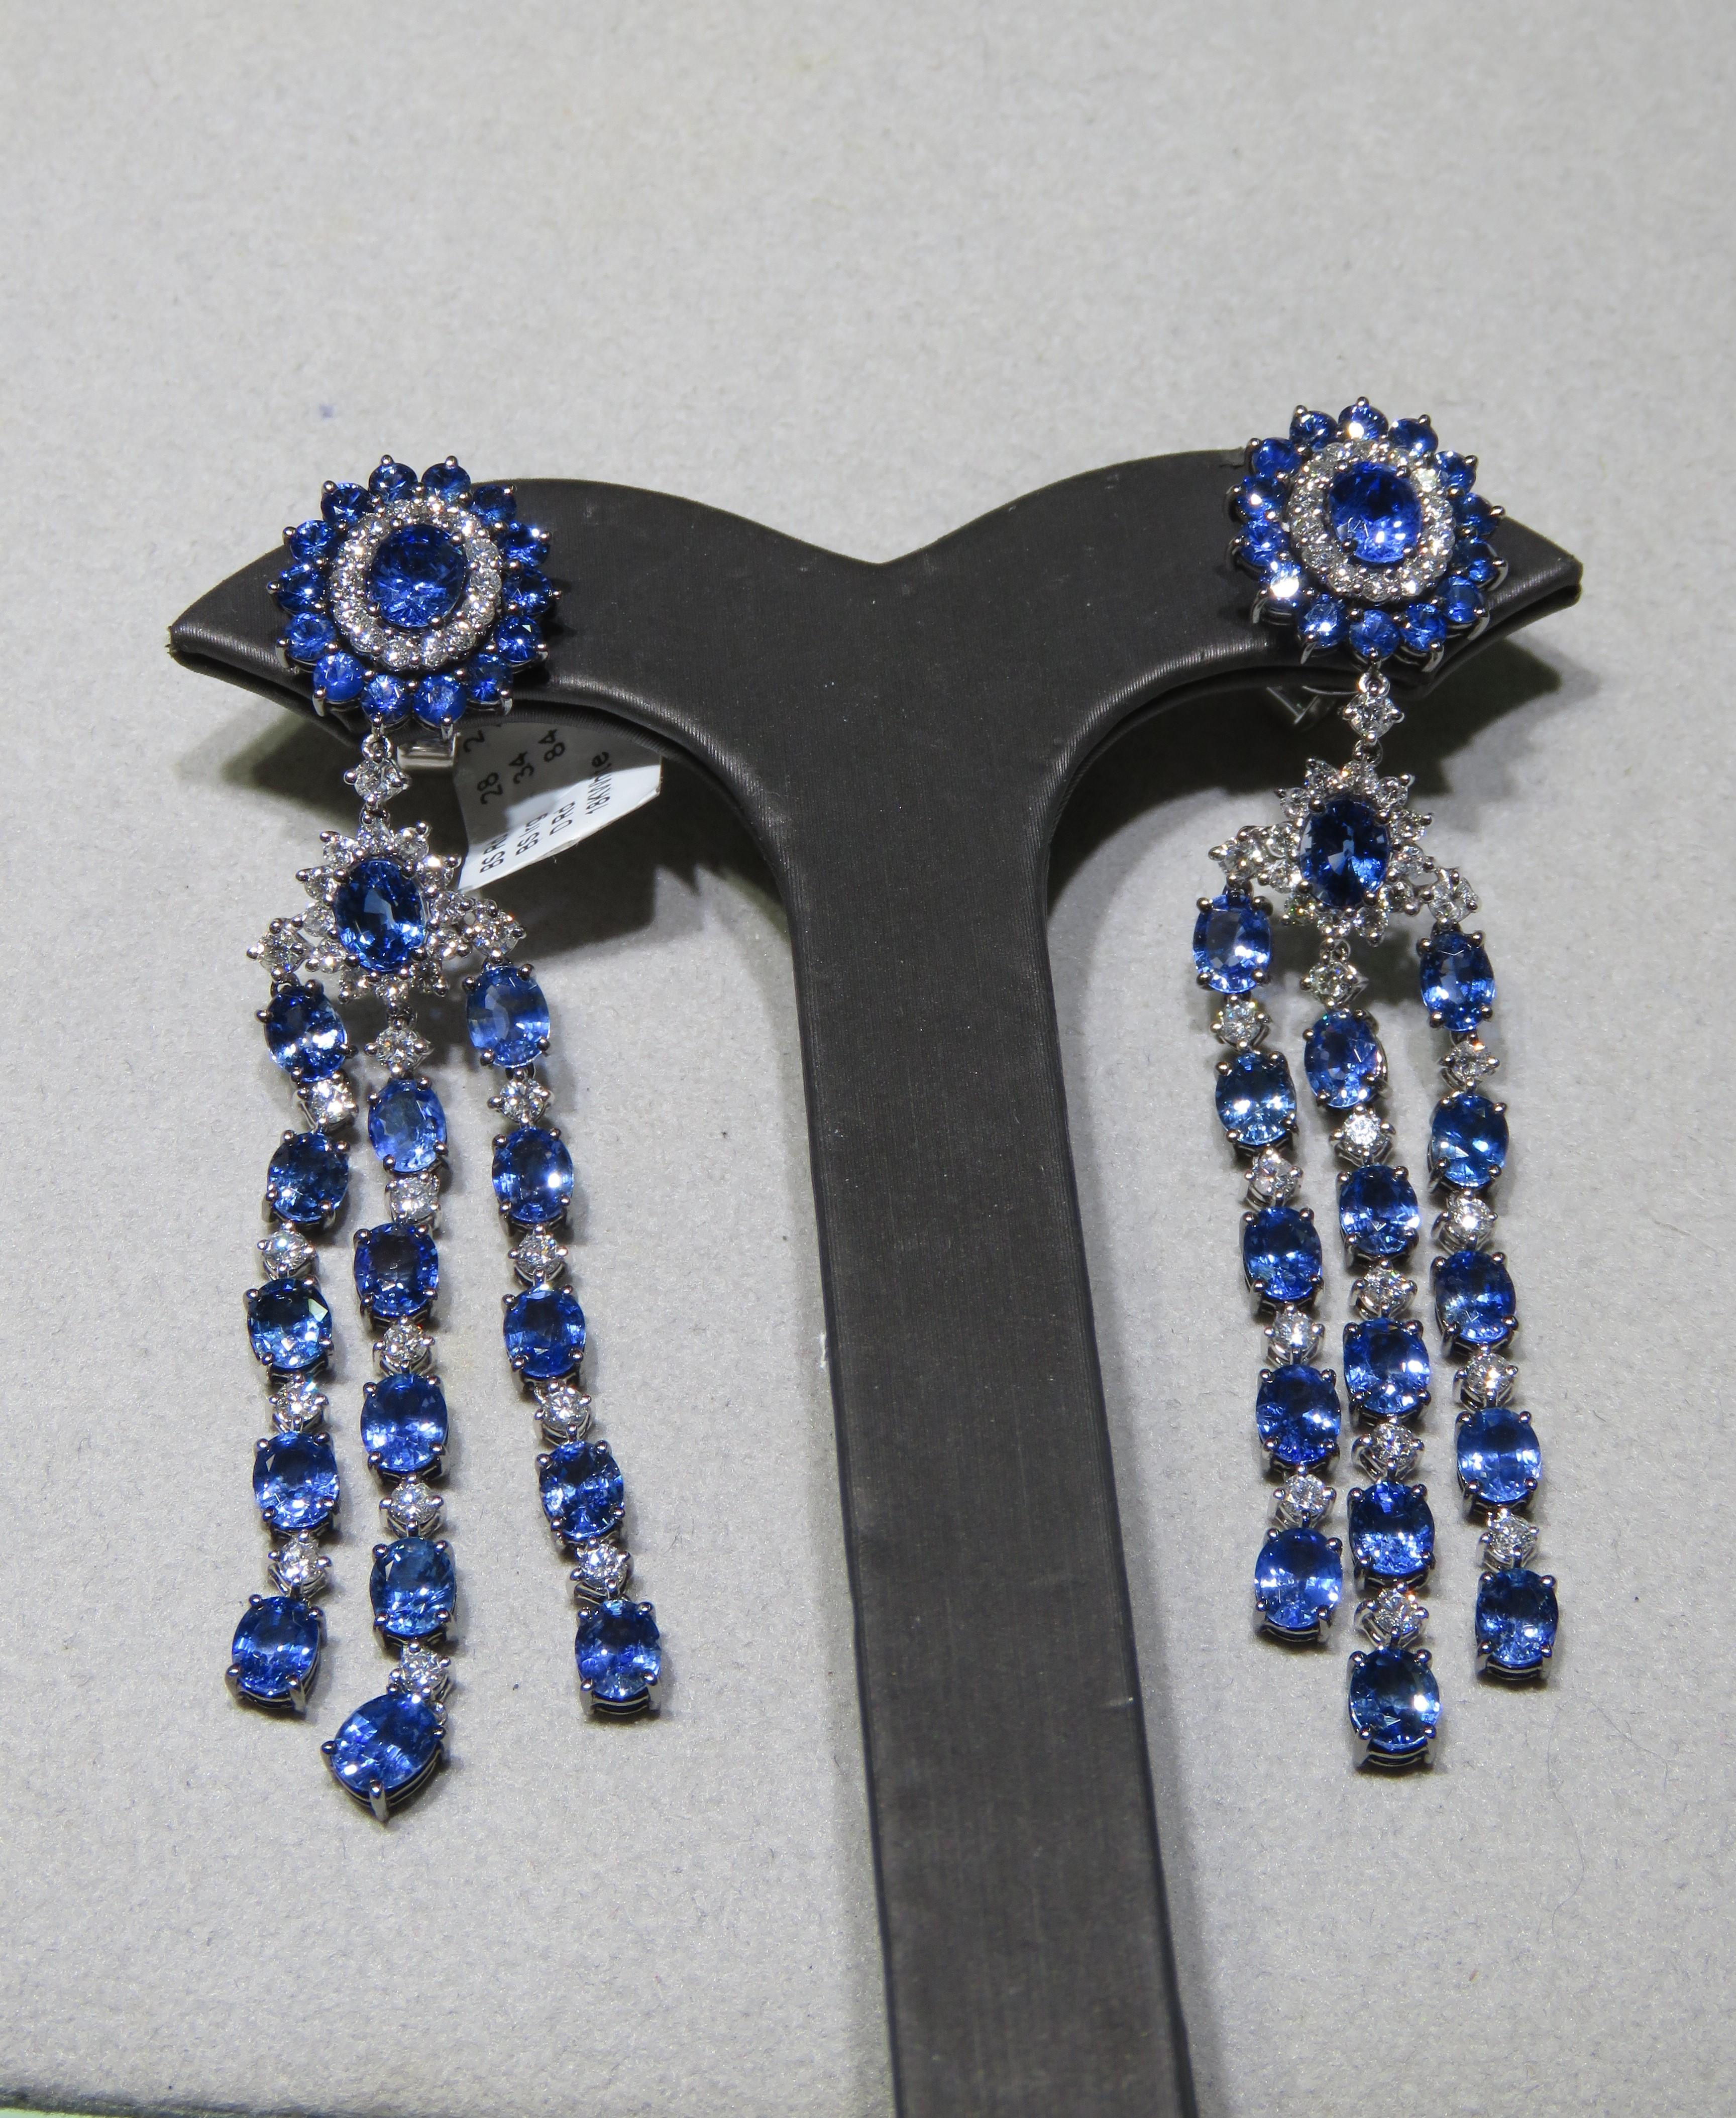 The Following Item we are offering are these Extremely Rare Beautiful 18KT Gold Fine Large Fancy Blue Sapphire Dangle Earrings. Each Earring features Rare Gorgeous Glittering Fancy Blue Sapphires Draped with Sparkling White Diamonds in 18KT Gold.